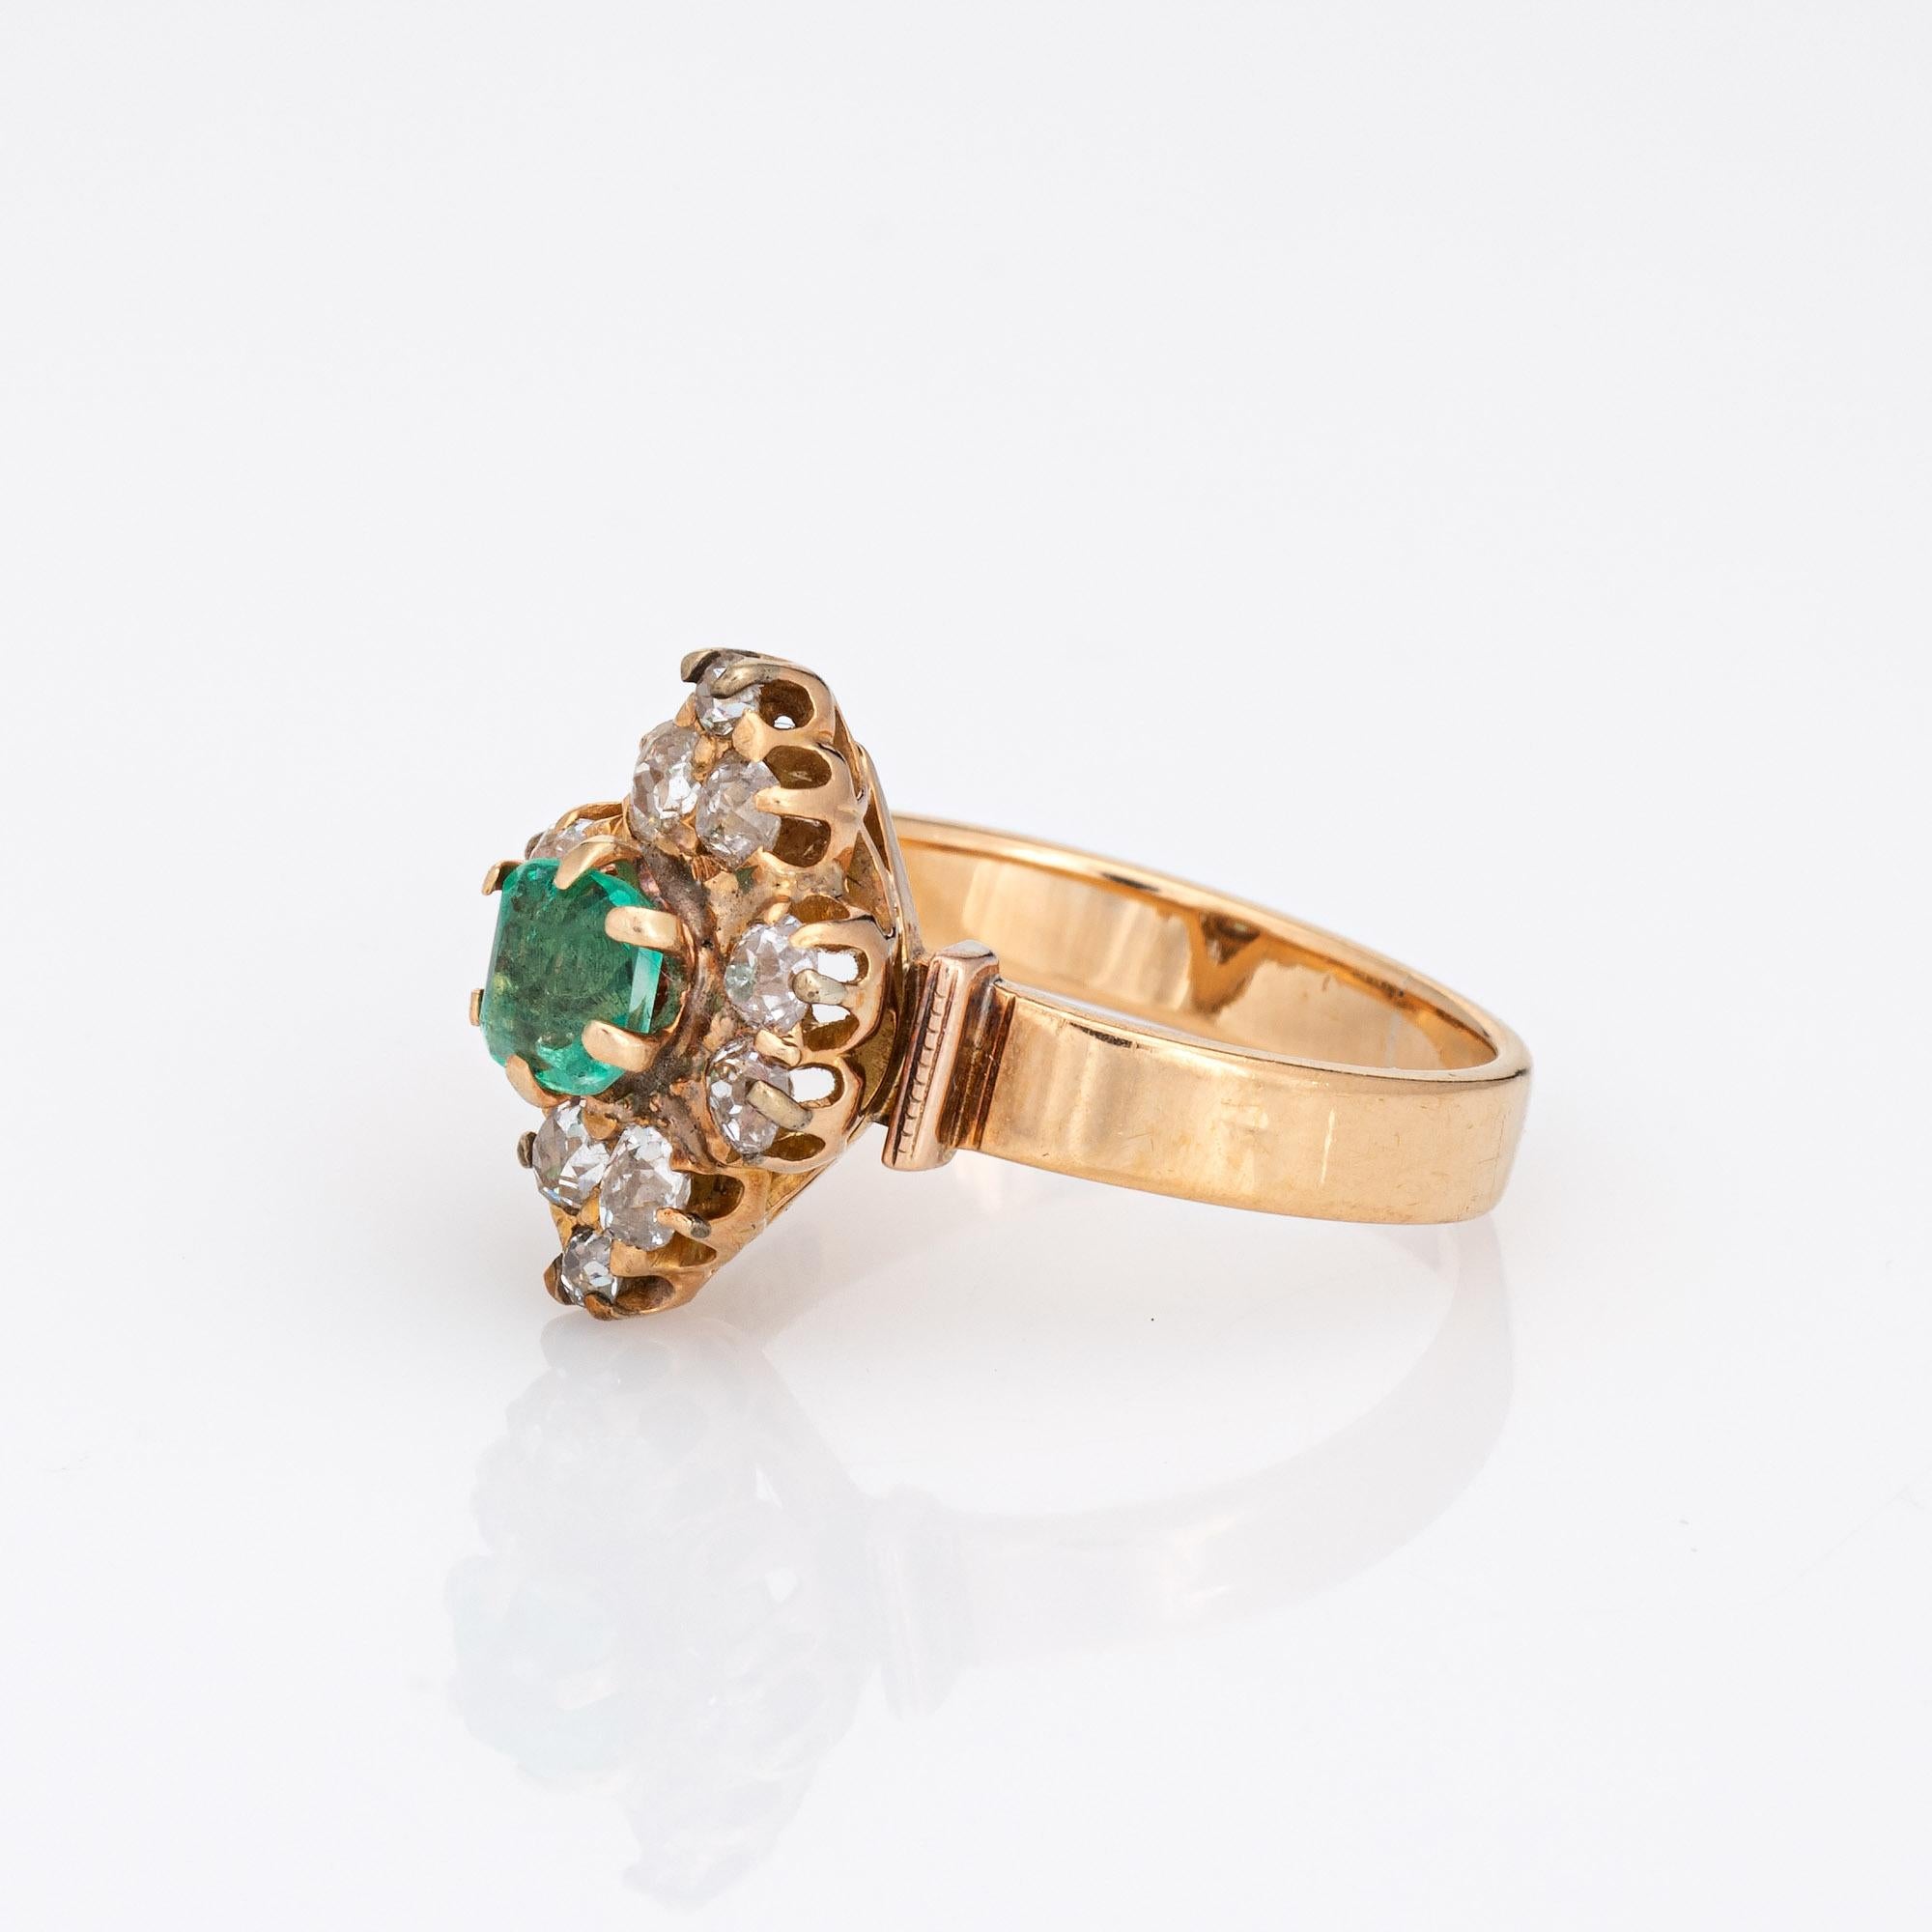 Antique Victorian Emerald Diamond Ring 18k Yellow Gold Vintage Fine Jewelry 5.5 In Good Condition For Sale In Torrance, CA